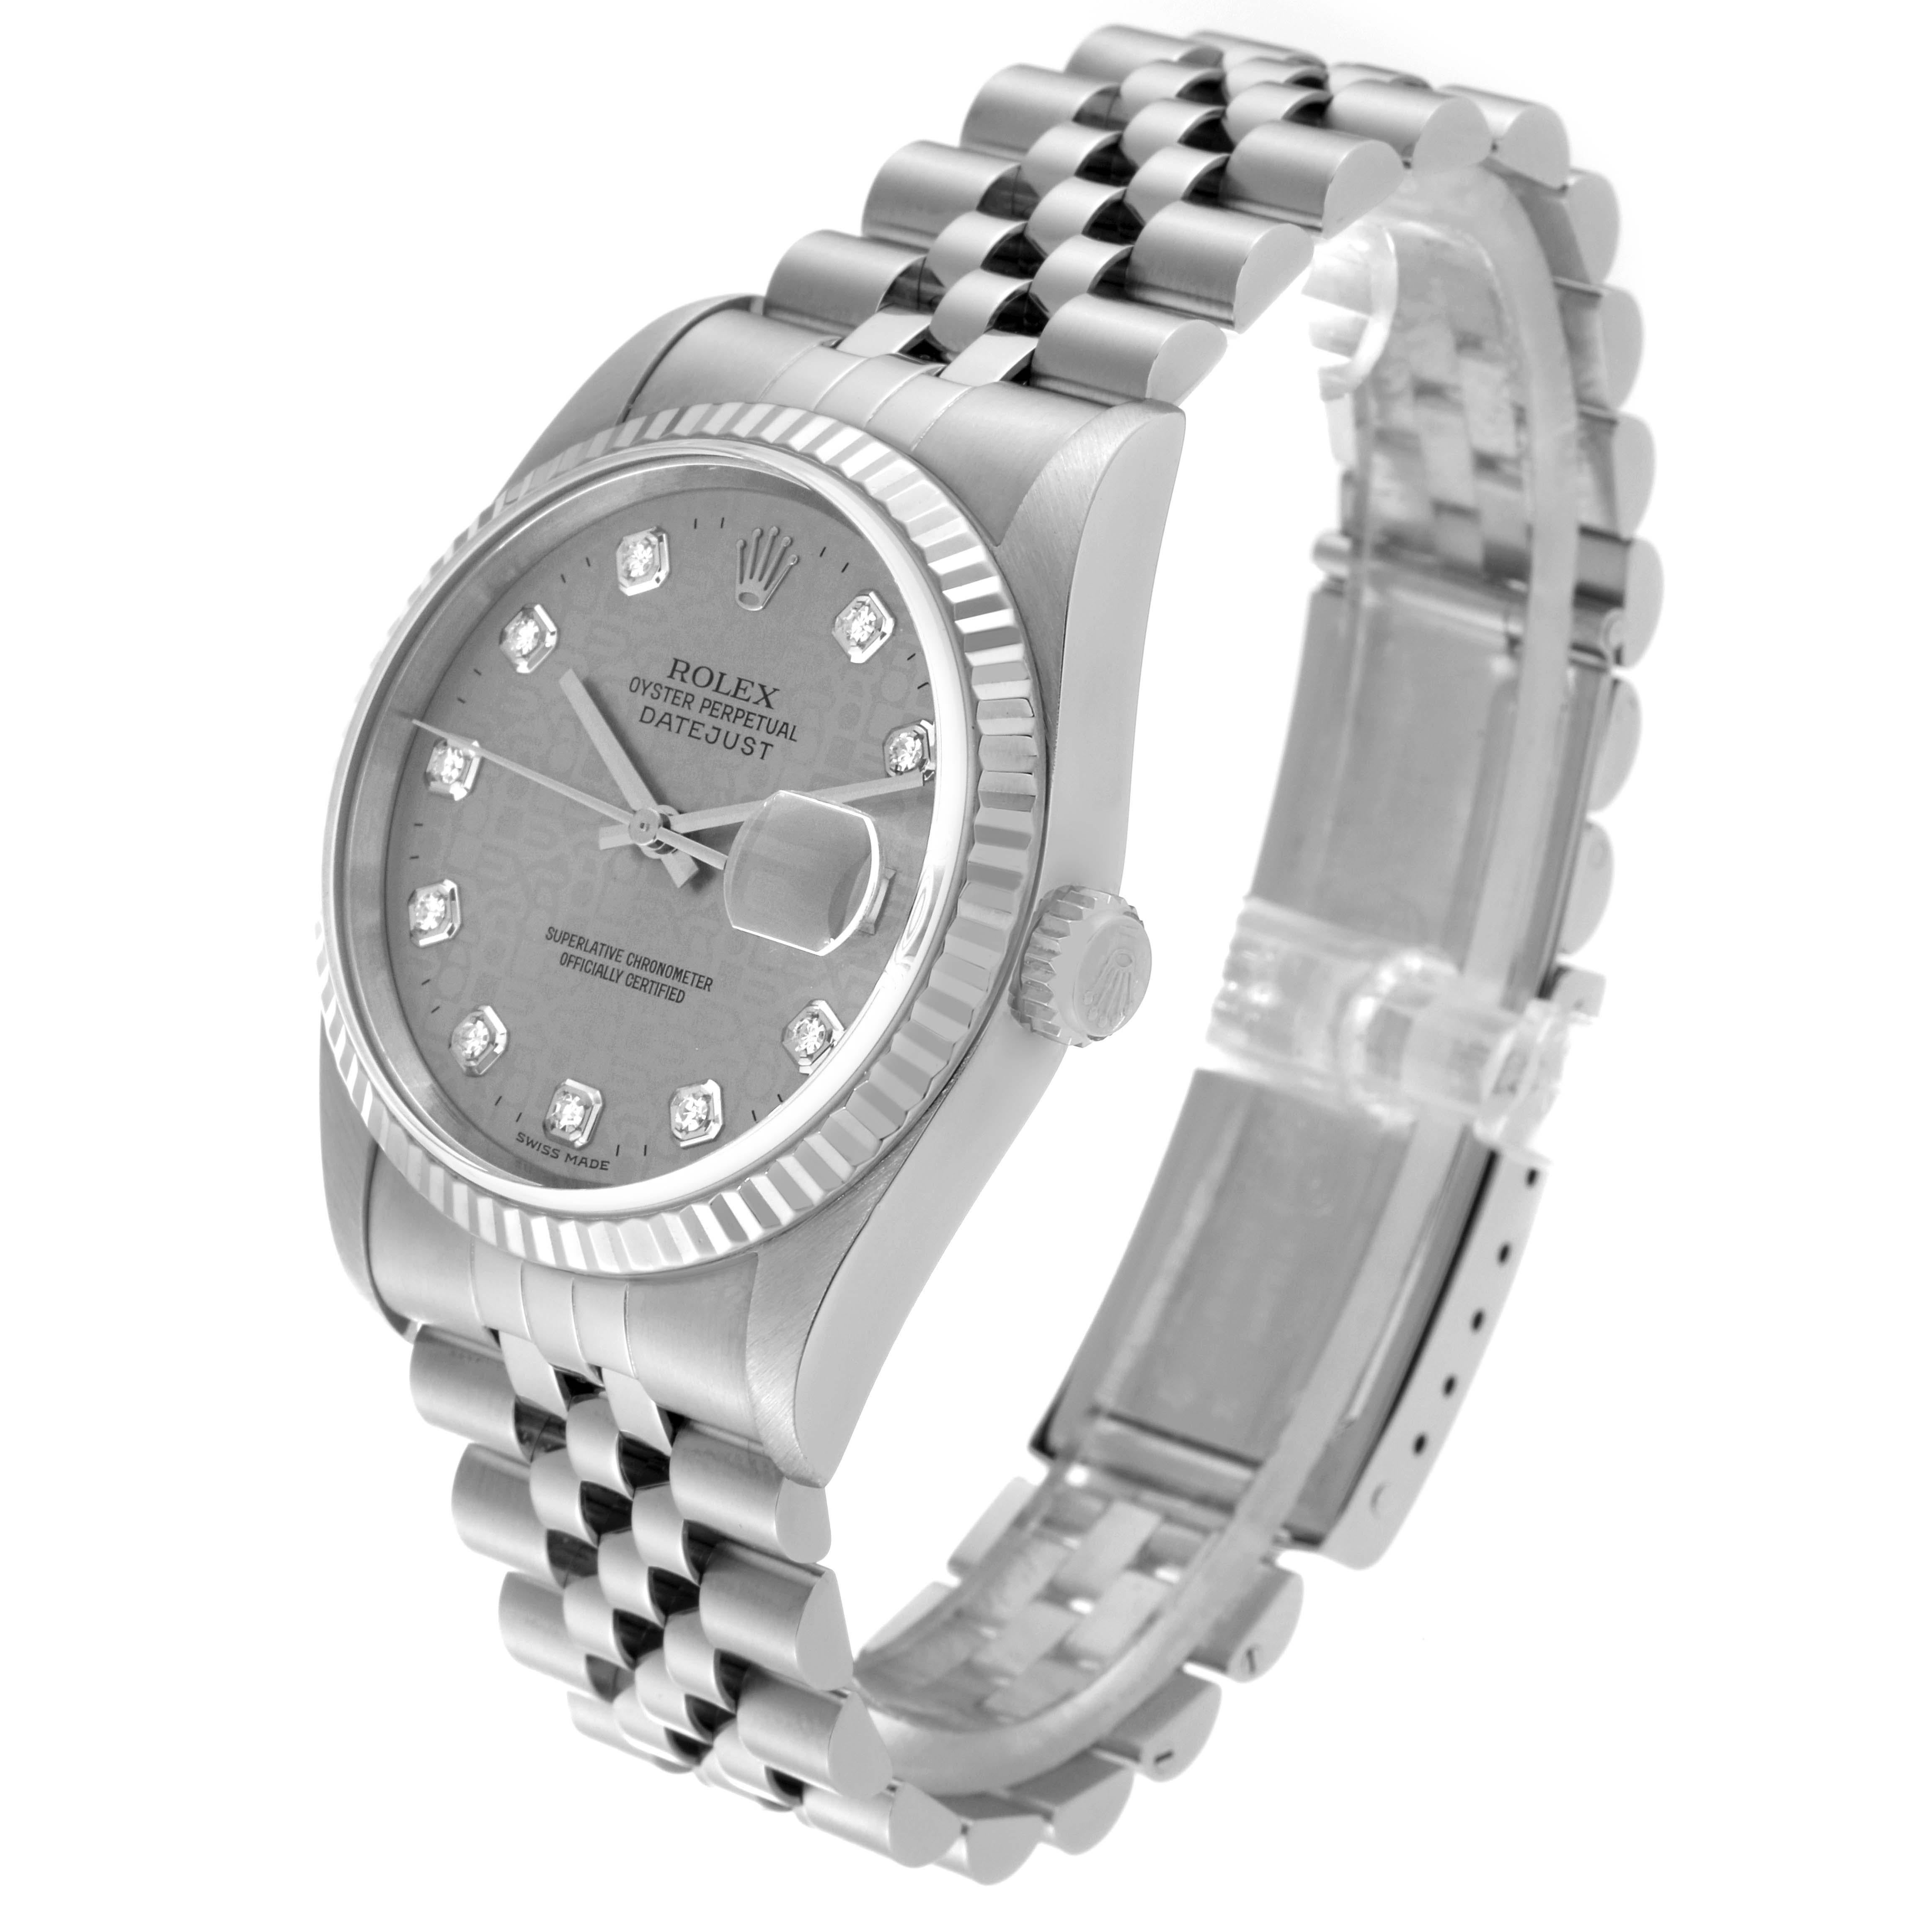 Rolex Datejust Steel White Gold Anniversary Diamond Dial Mens Watch 16234 For Sale 2